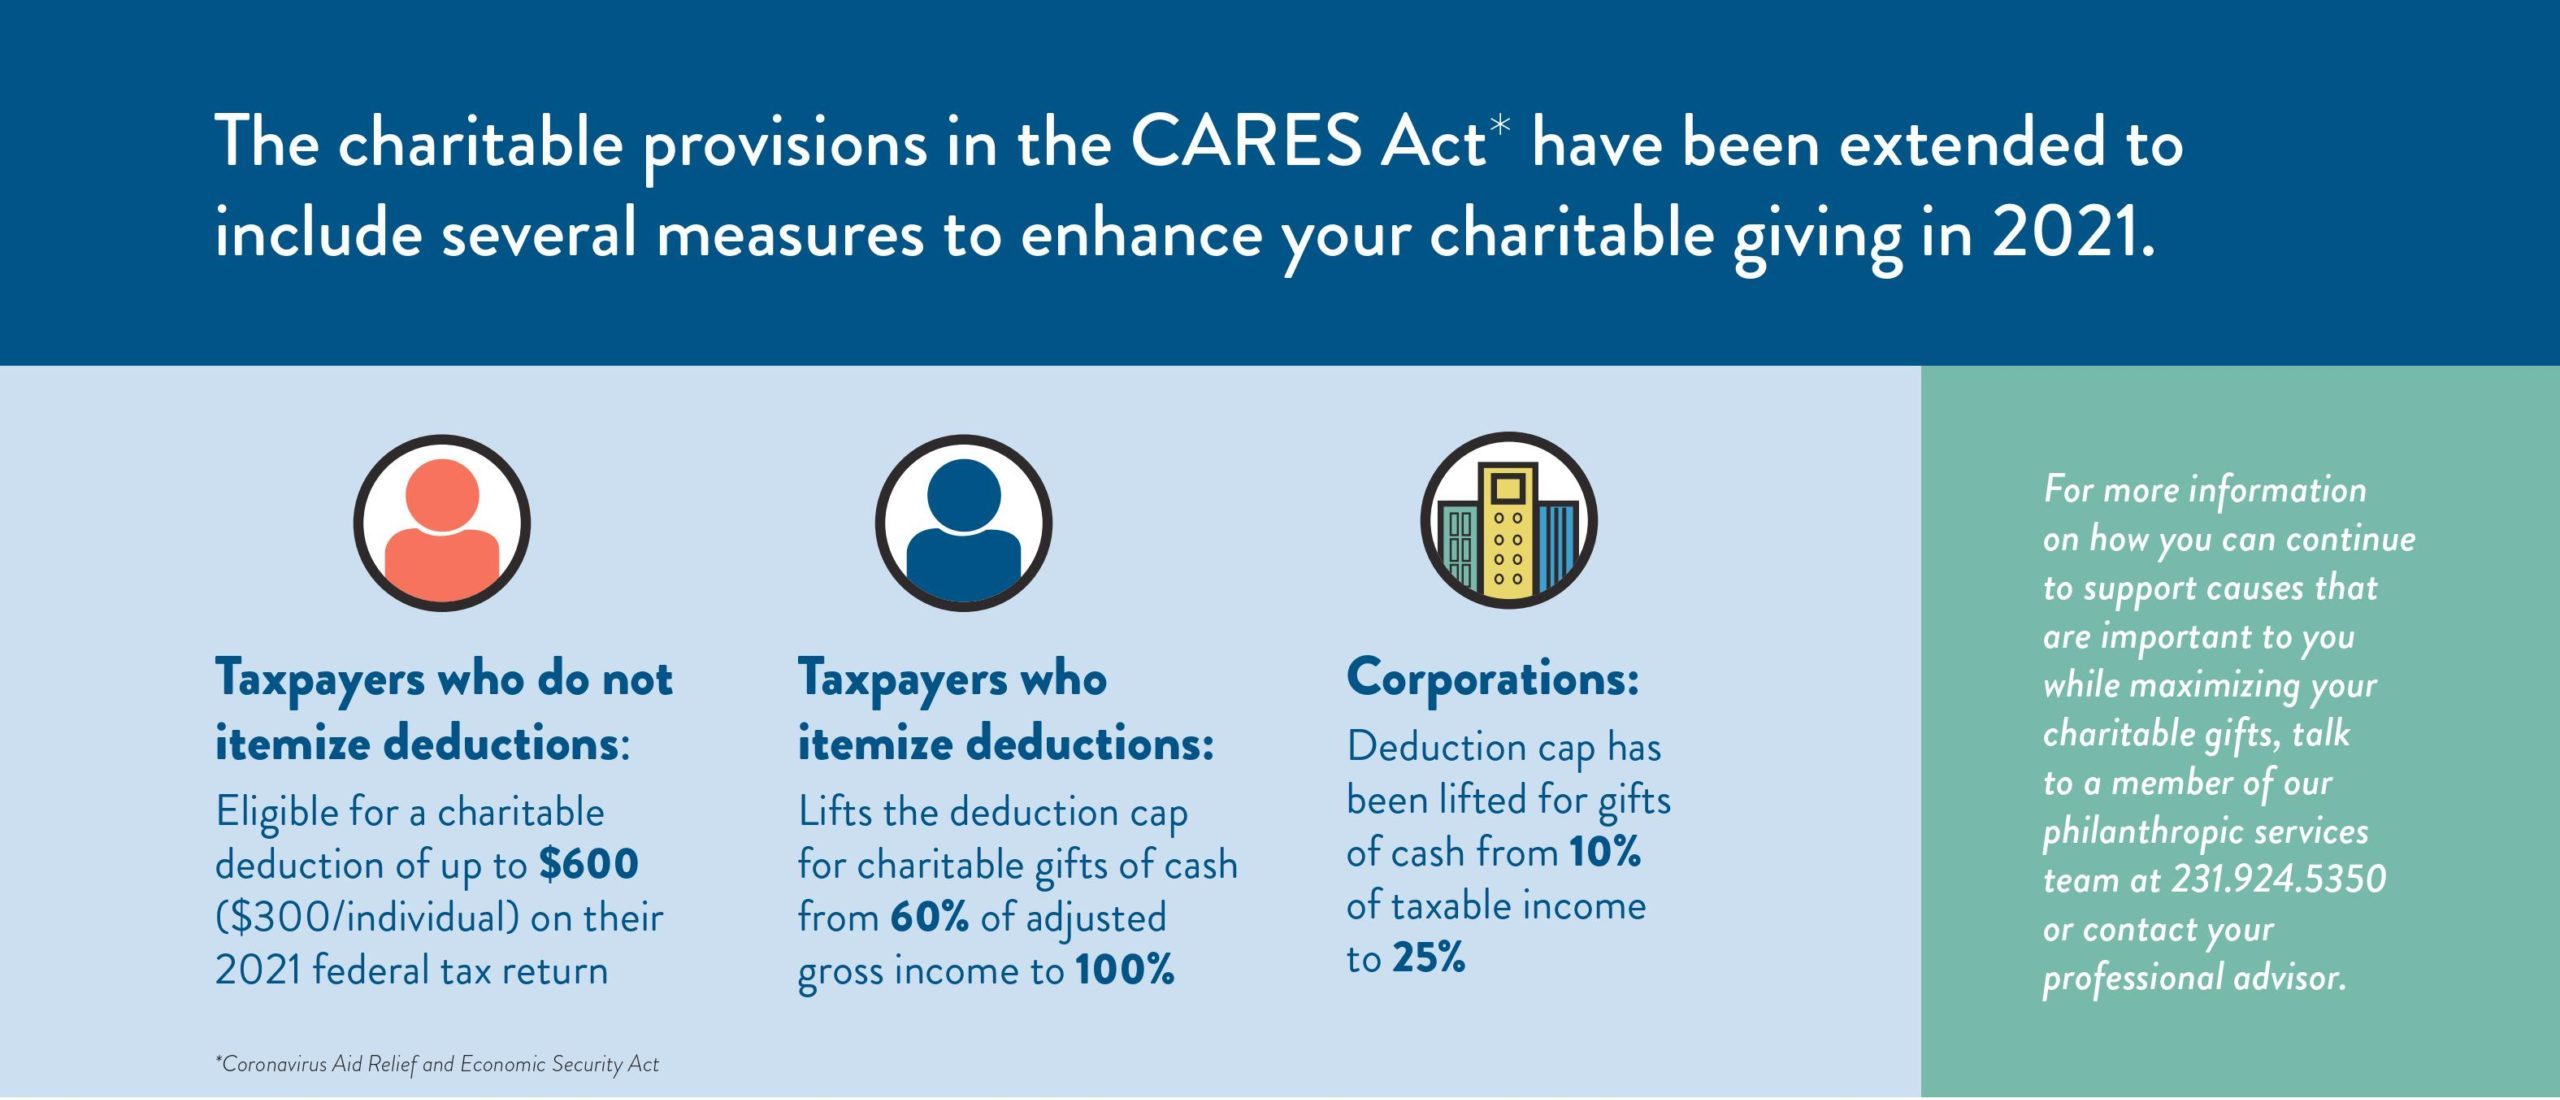 Enhance your charitable giving in 2021